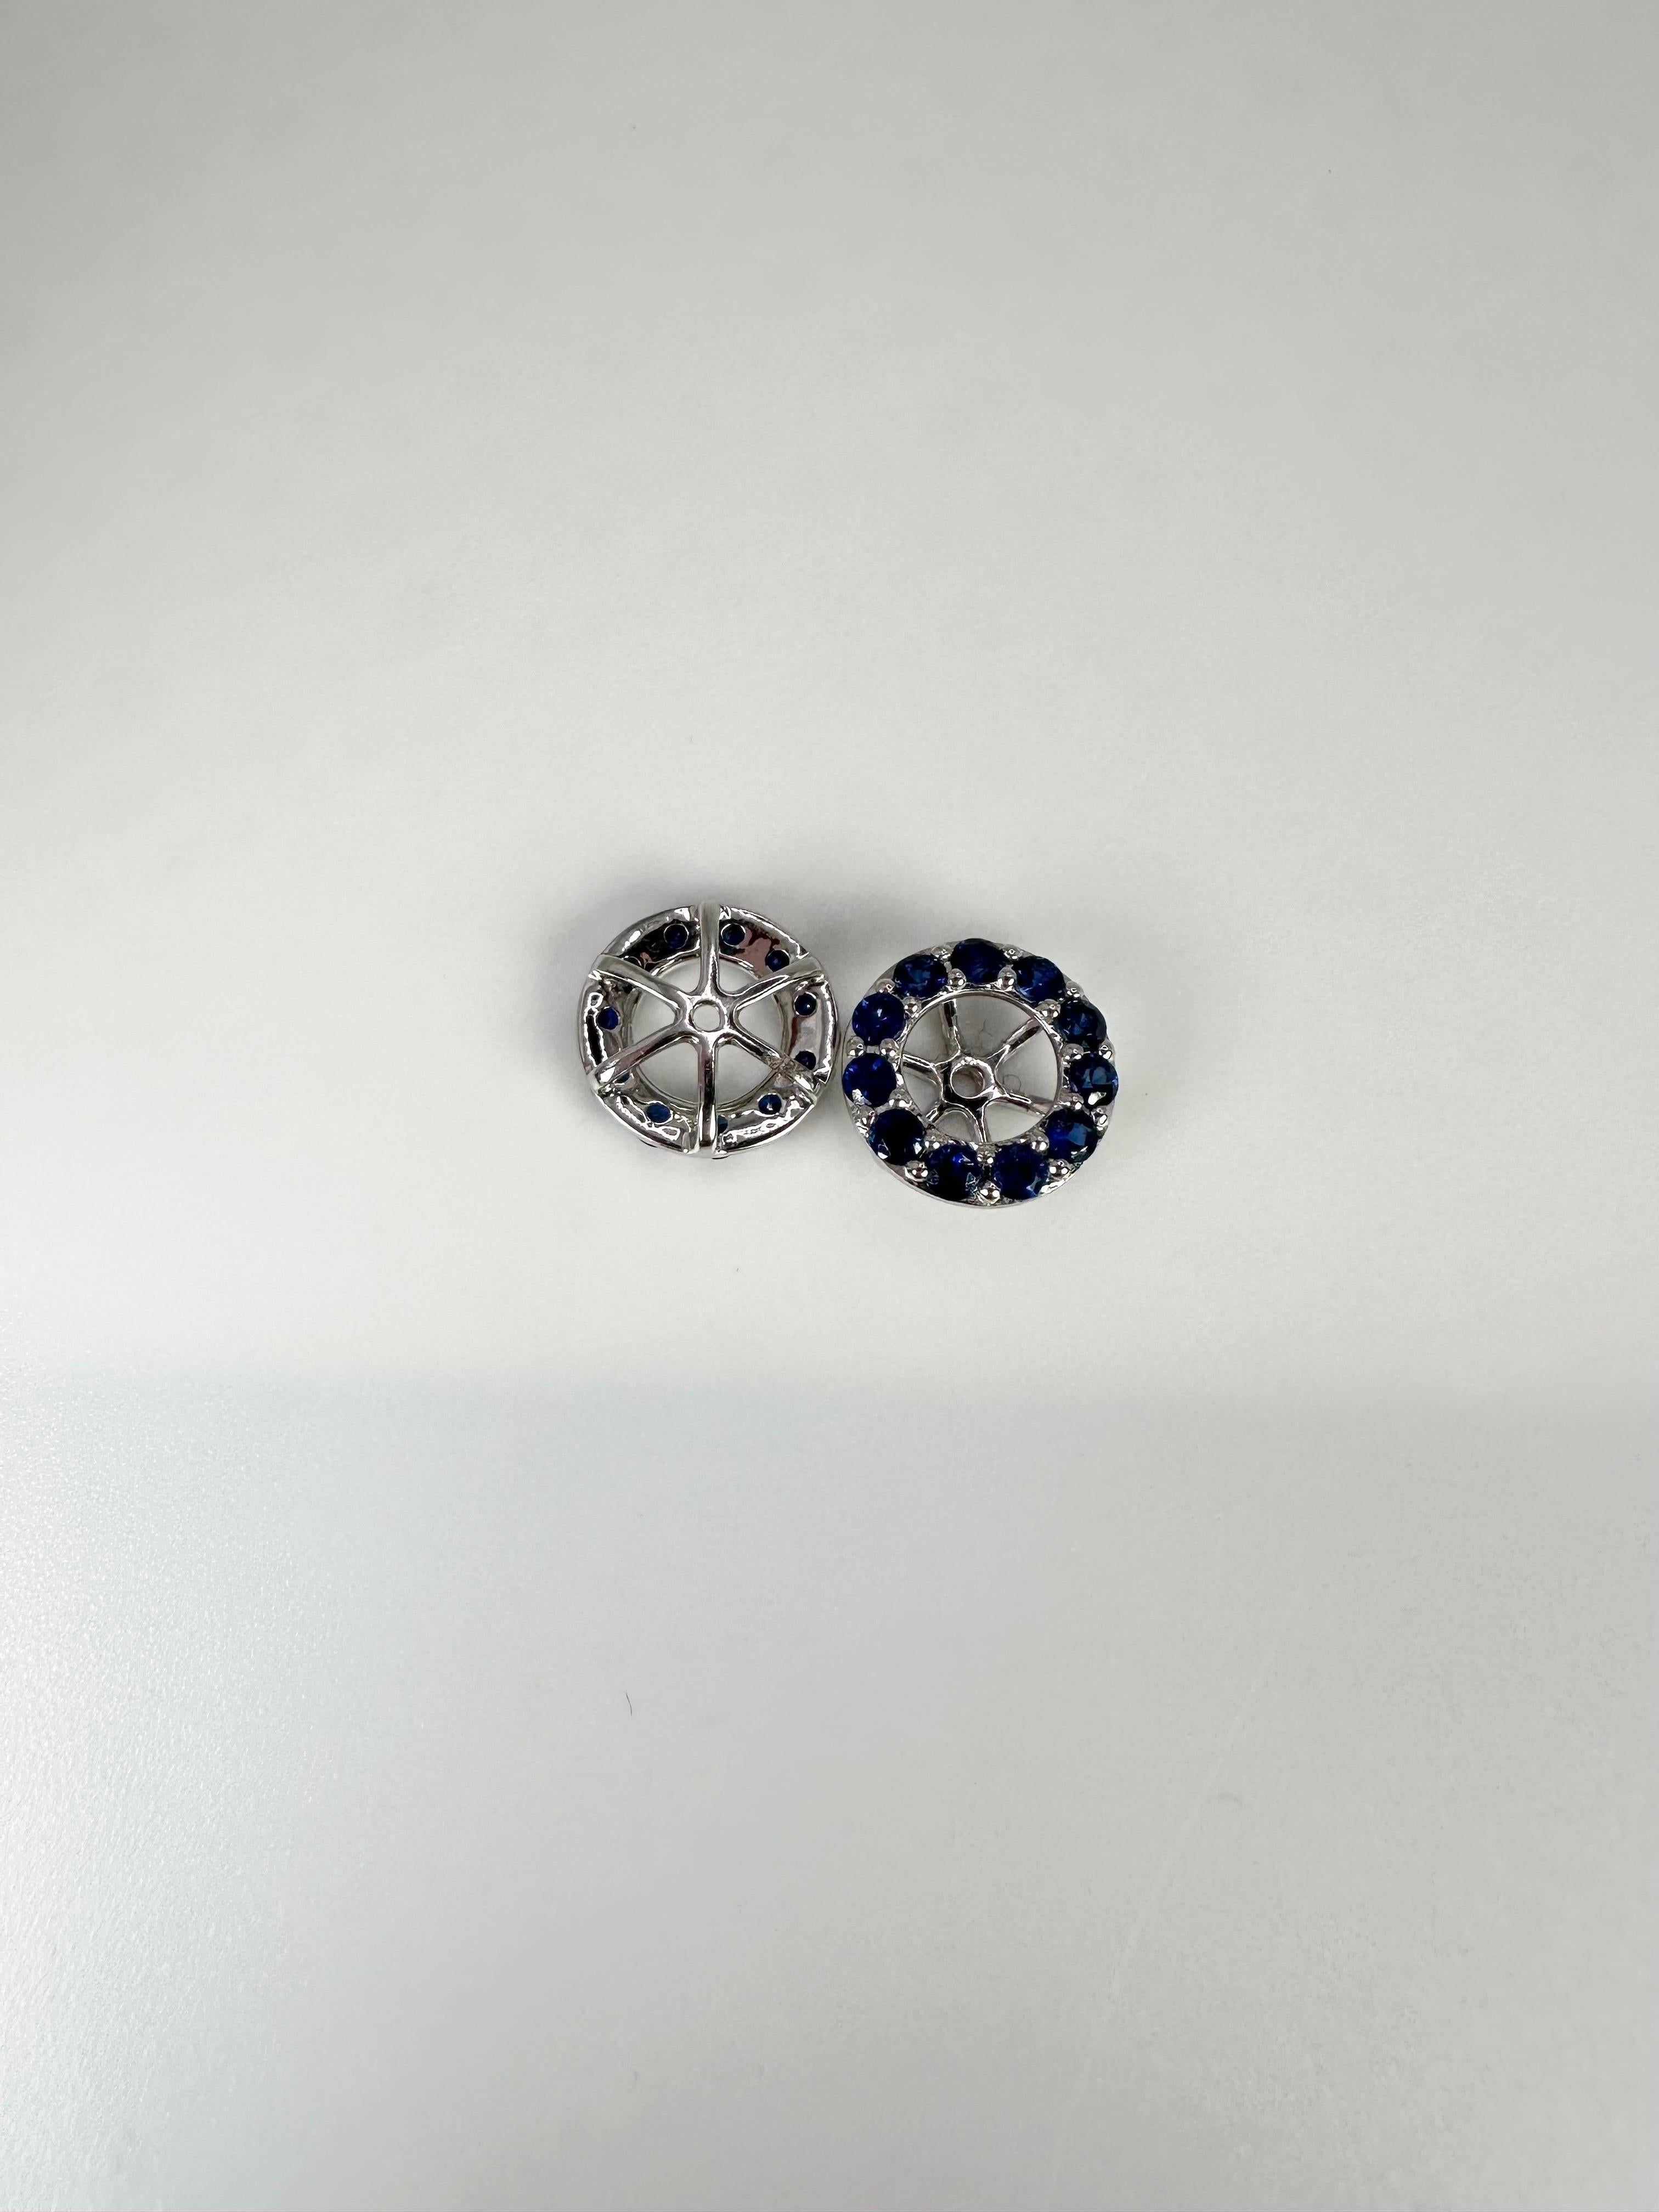 Sapphire jackets for studs fits all, natural sapphires made in 18kt white gold.

GOLD: 18KT gold
NATURAL SAPPHIRE(S)
Clarity/Color: Slightly included
Carat:1.08ct
Gram(s):1.89
Item#: 210-00004 AFT

WHAT YOU GET AT STAMPAR JEWELERS:
Stampar Jewelers,